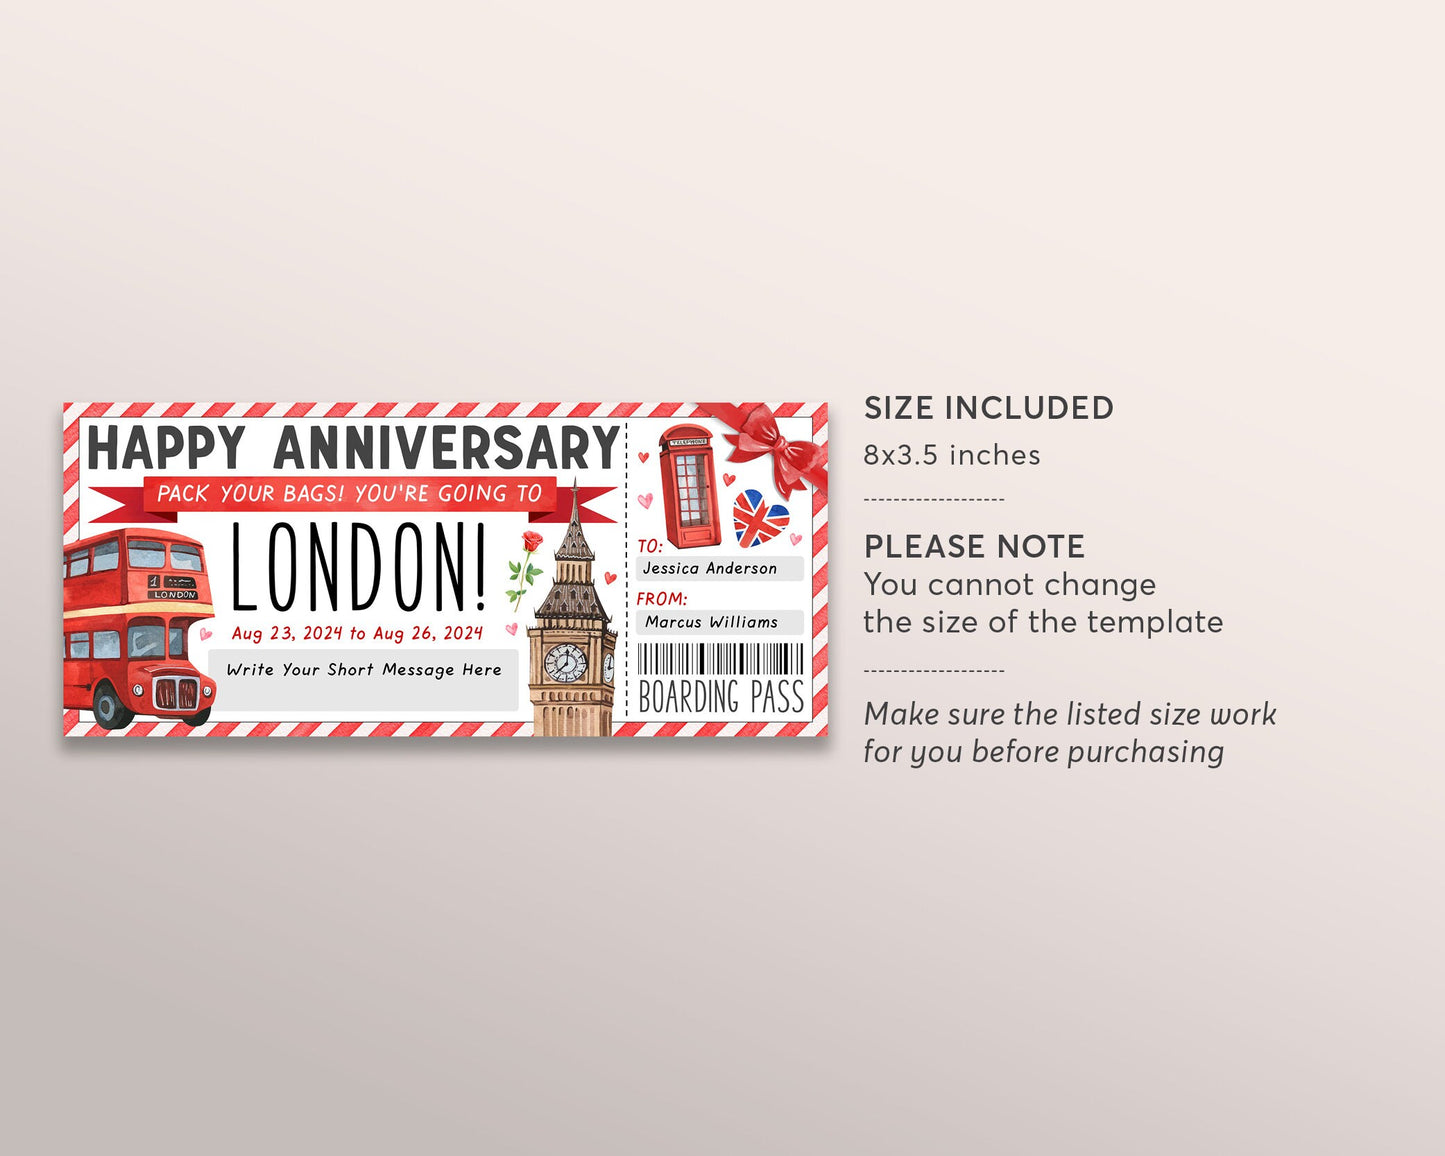 London Gift Ticket Boarding Pass Editable Template, Wedding Anniversary Surprise Travel Vacation Plane Ticket Certificate, England Holiday